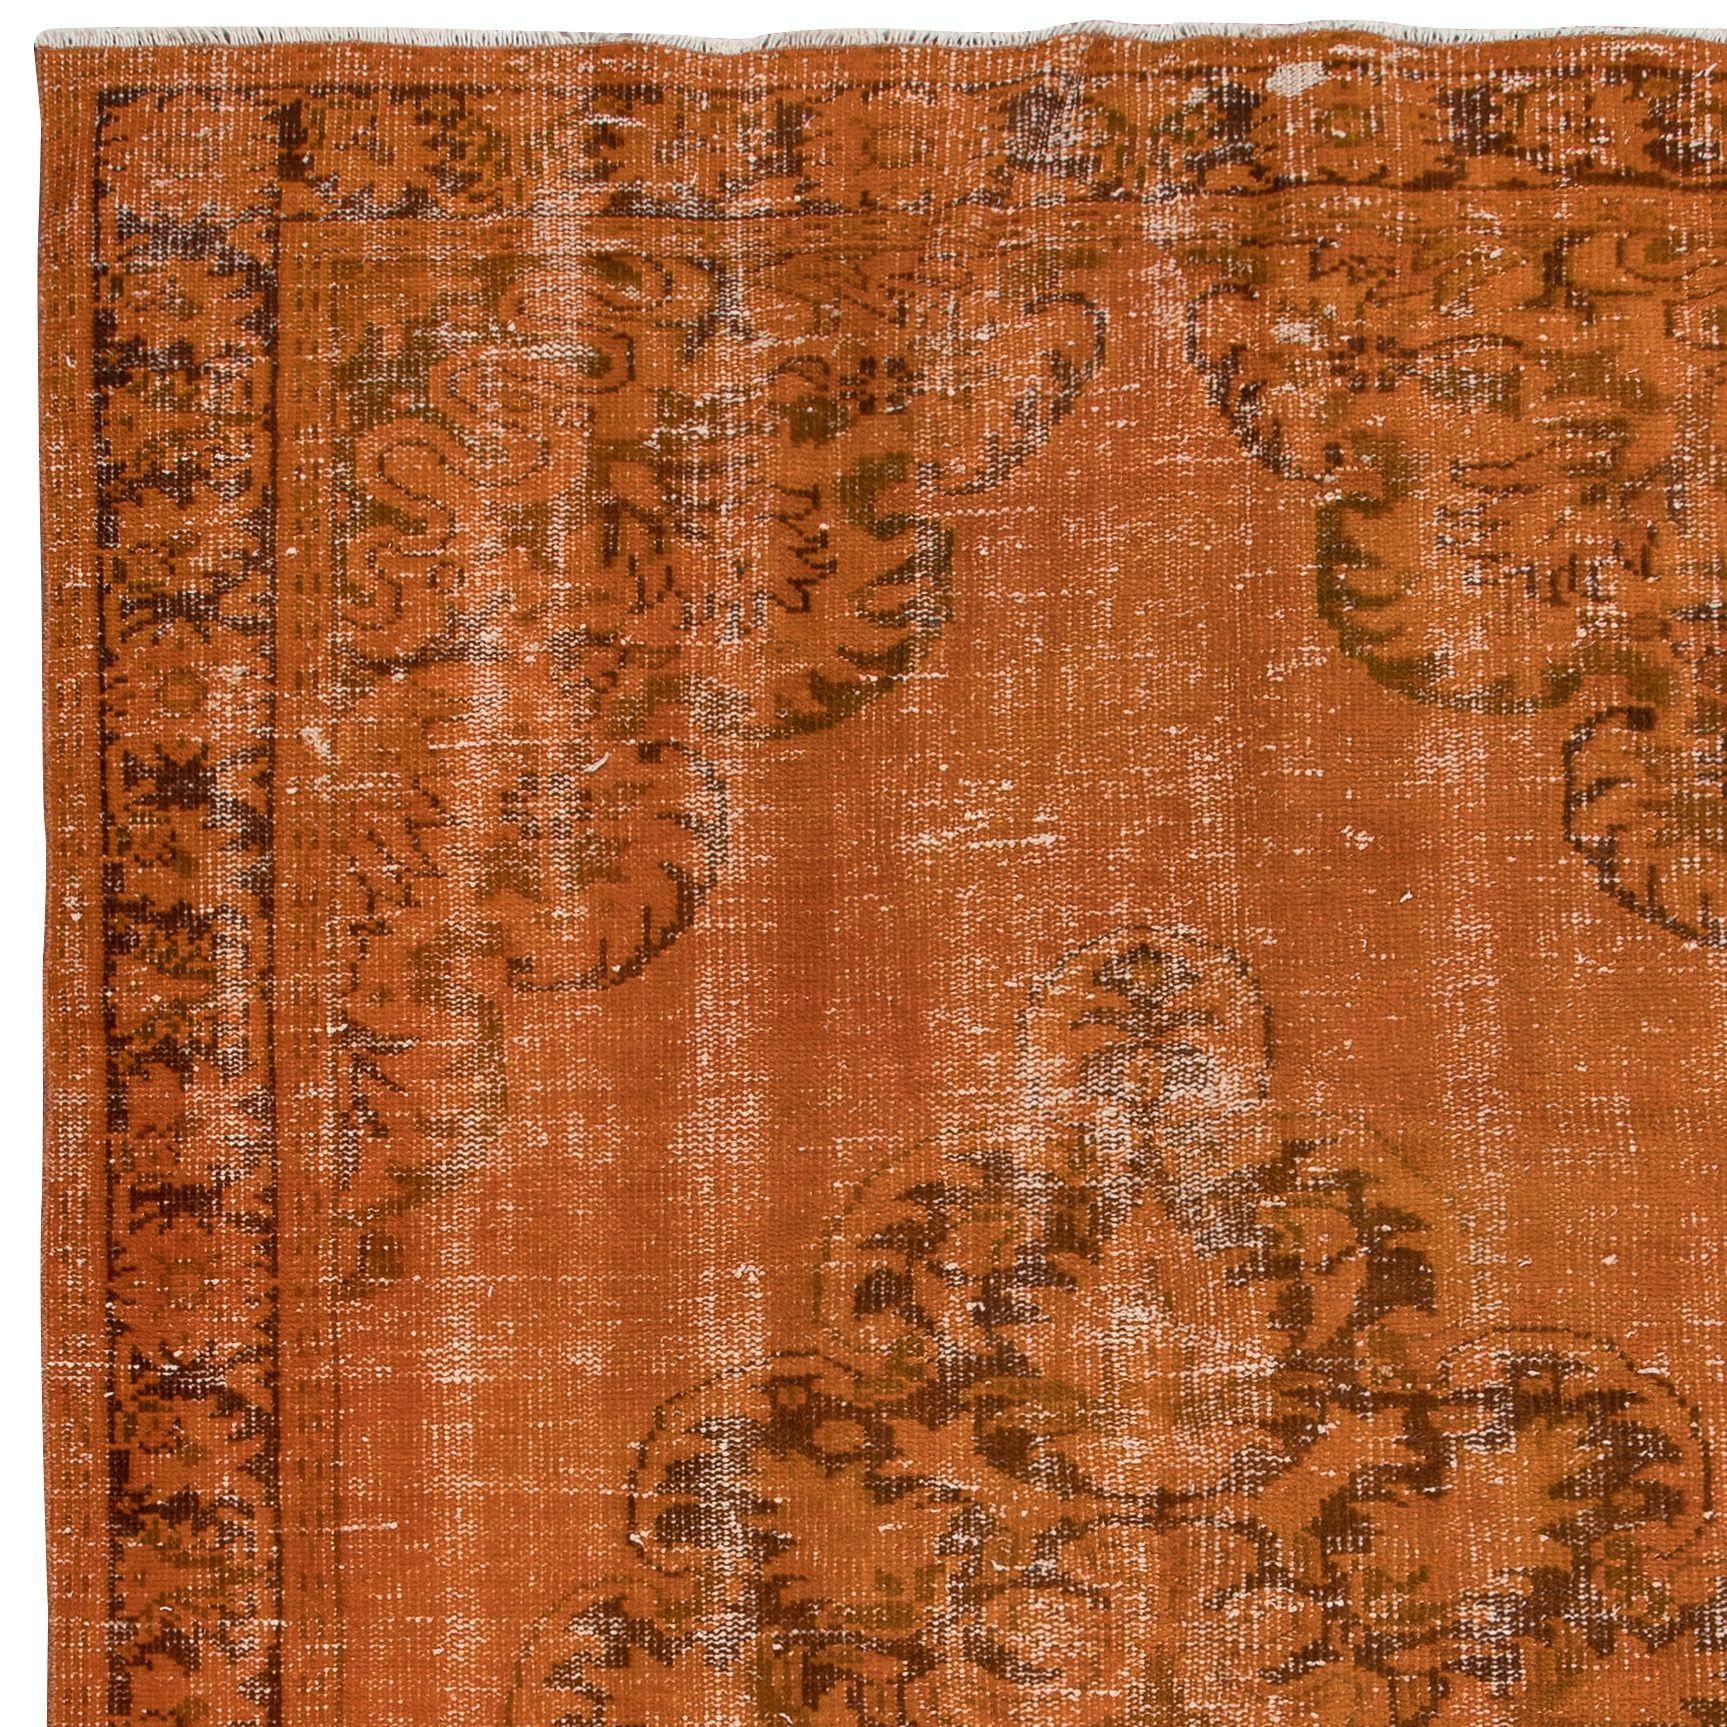 Hand-Woven 5.8x9.3 Ft Contemporary Living Room Carpet in Orange, Hand-Made Turkish Area Rug For Sale